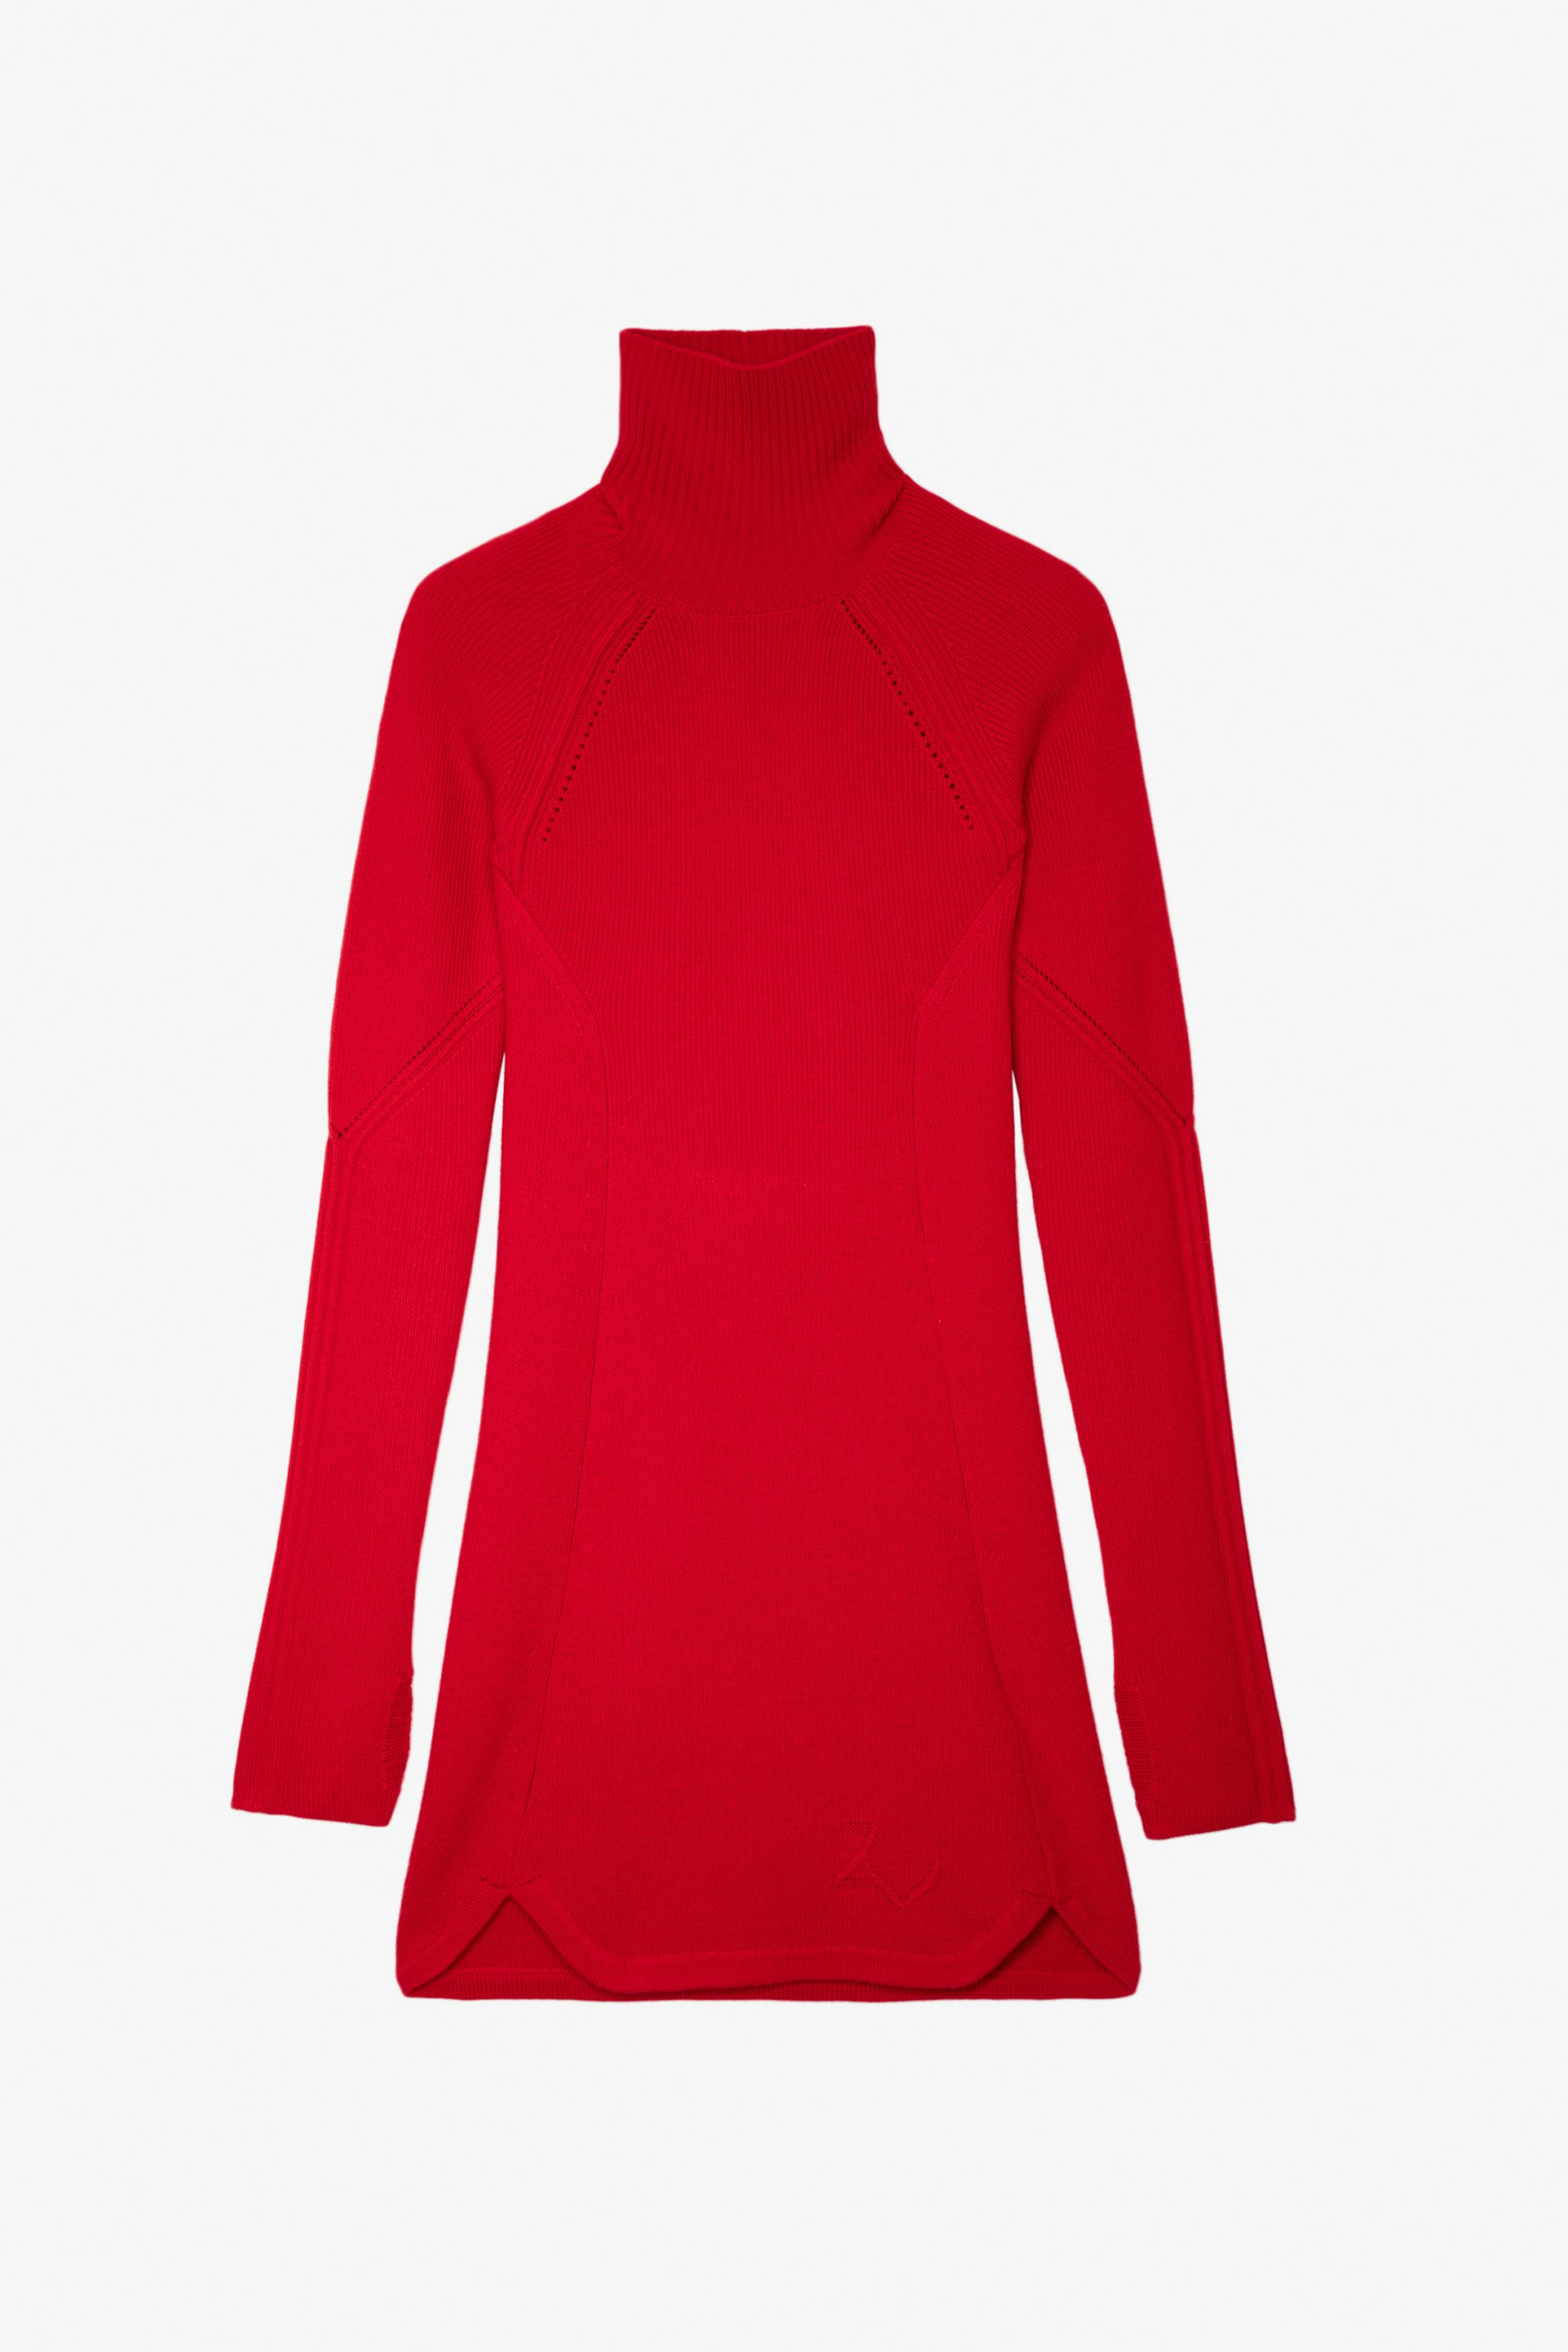 Viky Dress - Women’s short red merino wool dress with turtleneck and cut-out at the back.